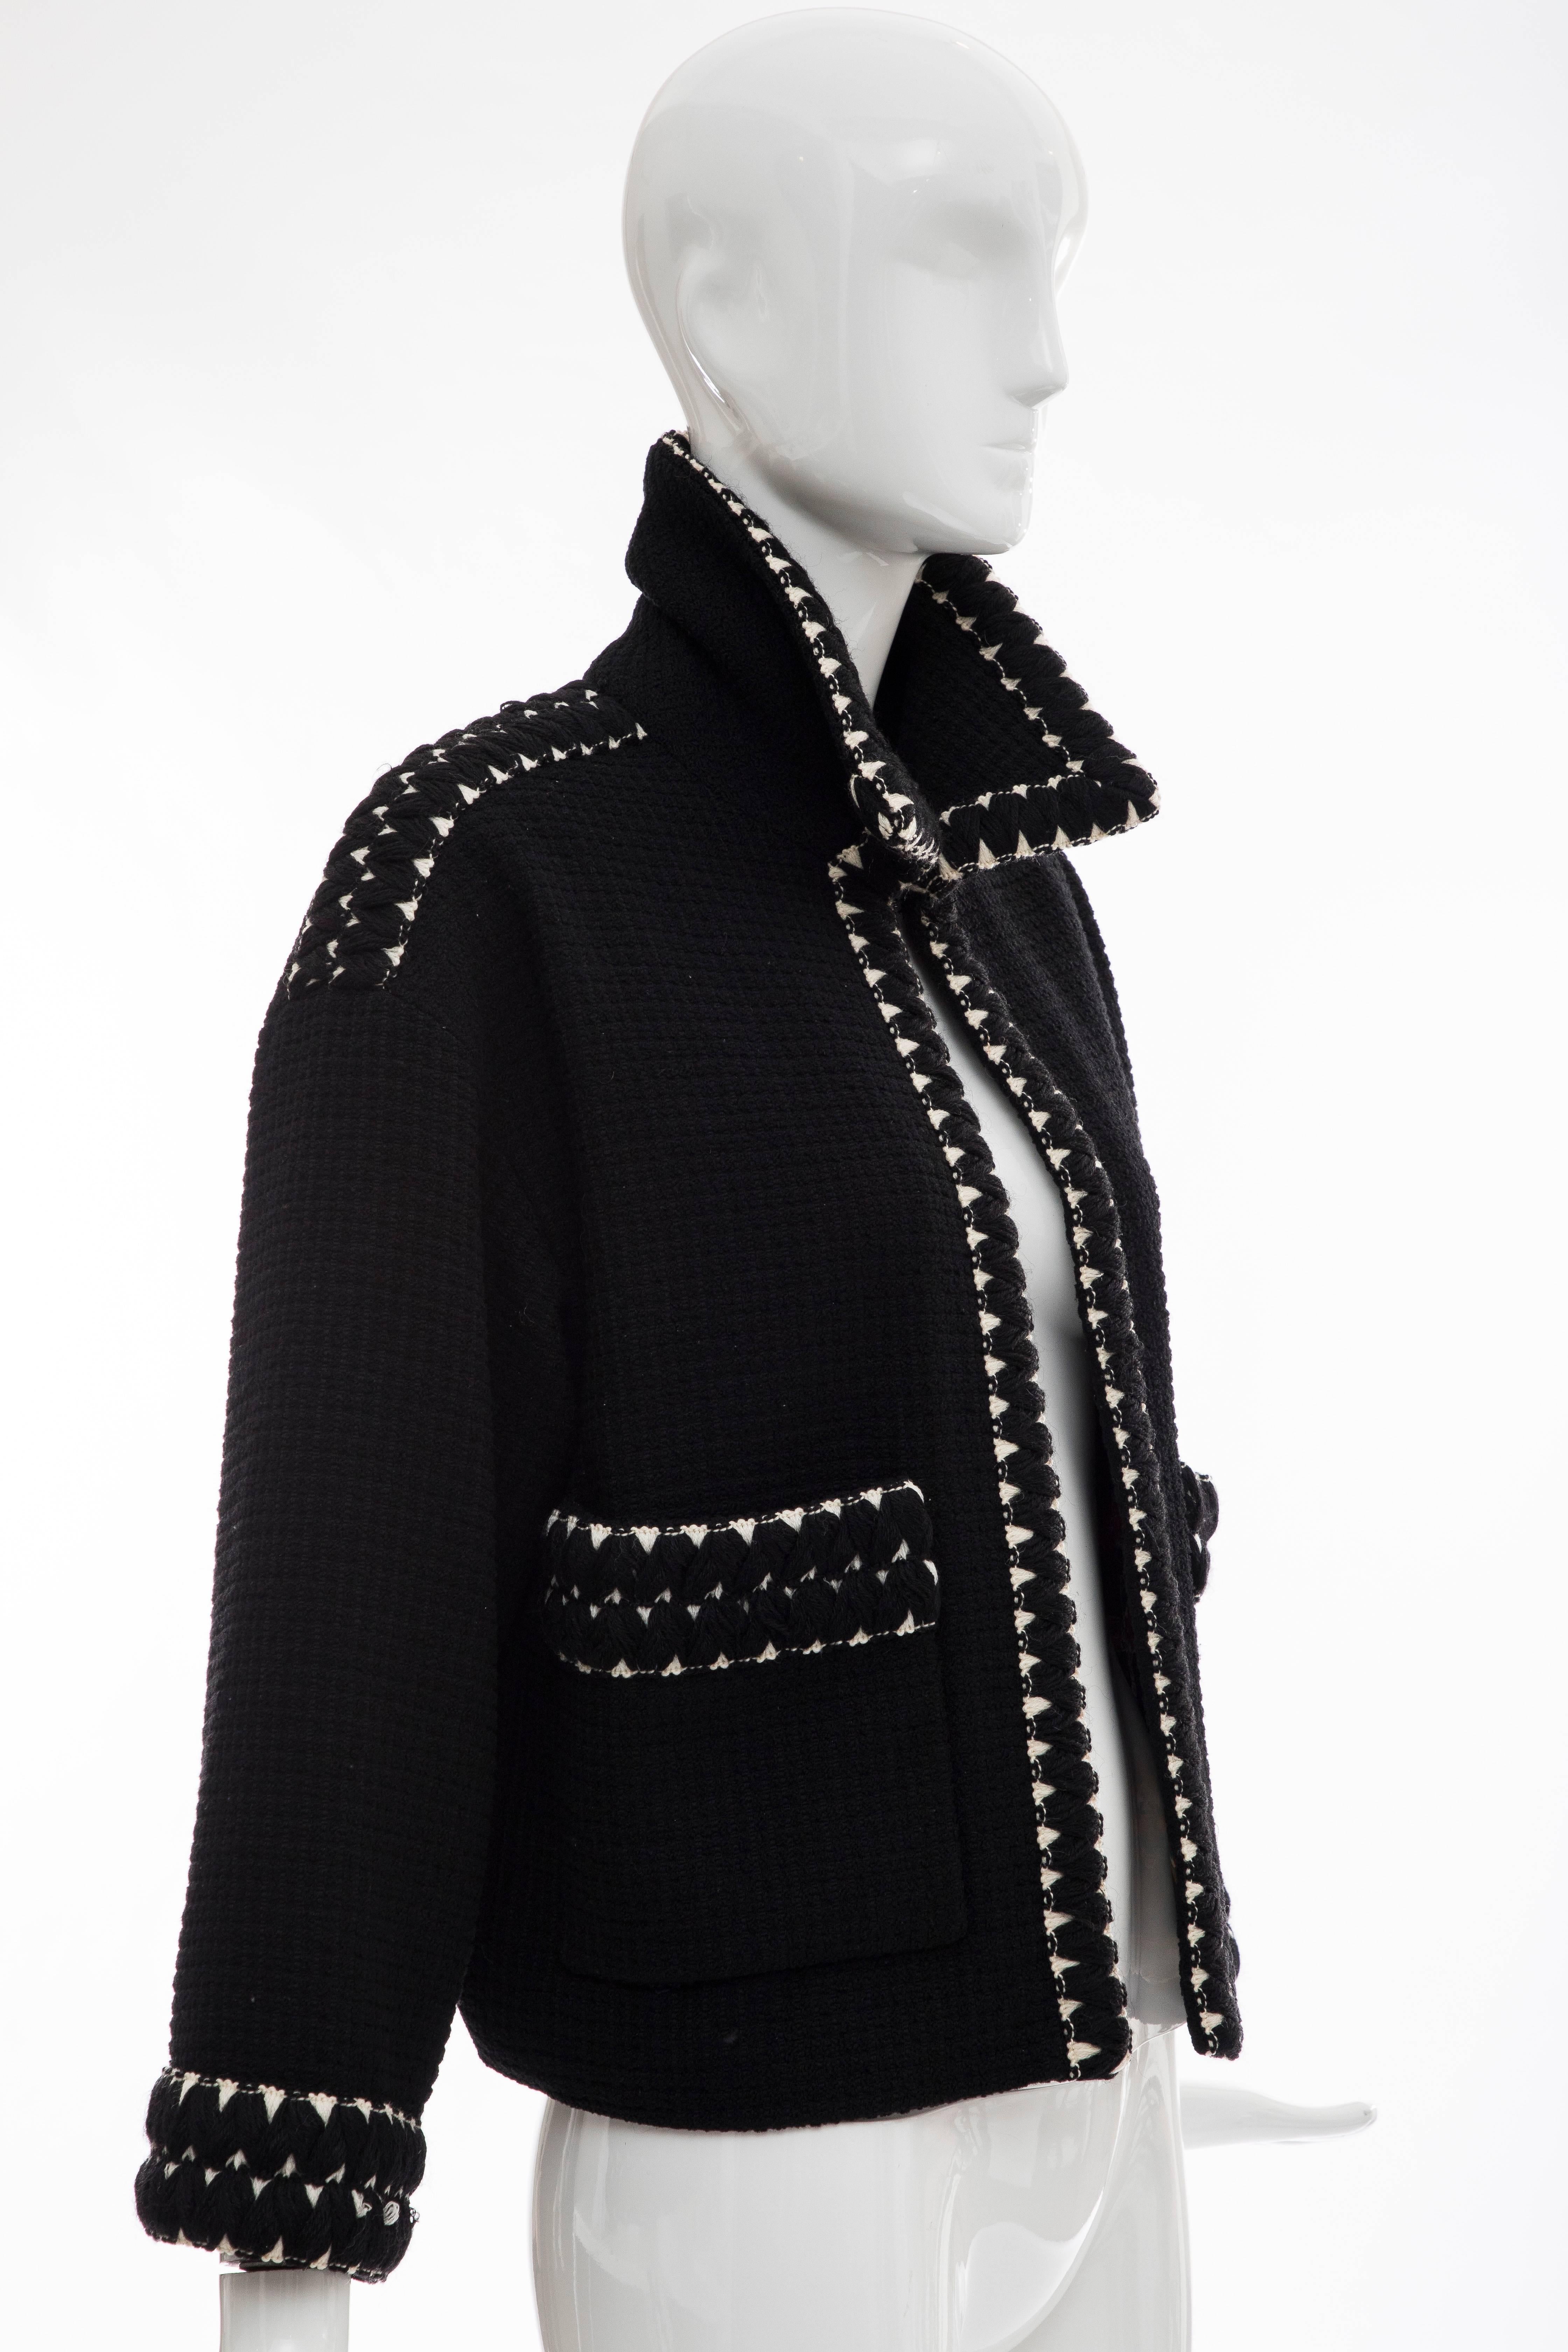 Women's Chanel Black Tweed Jacket With Embroidered Trim, Circa 1980's